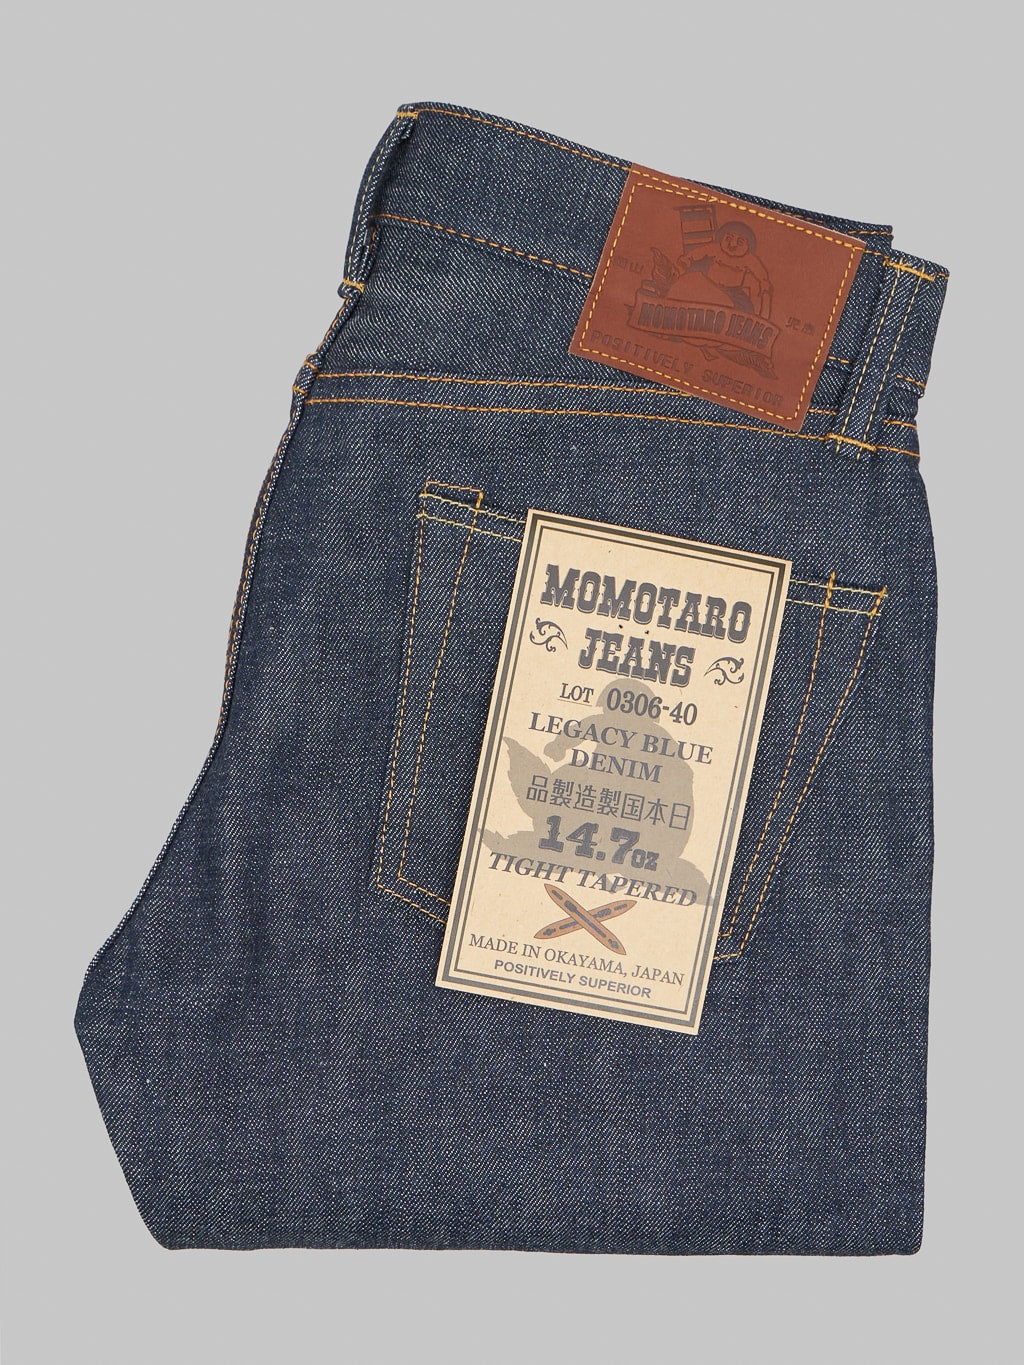 Momotaro 0306-40 14.7oz "Legacy Blue" Tight Tapered Jeans